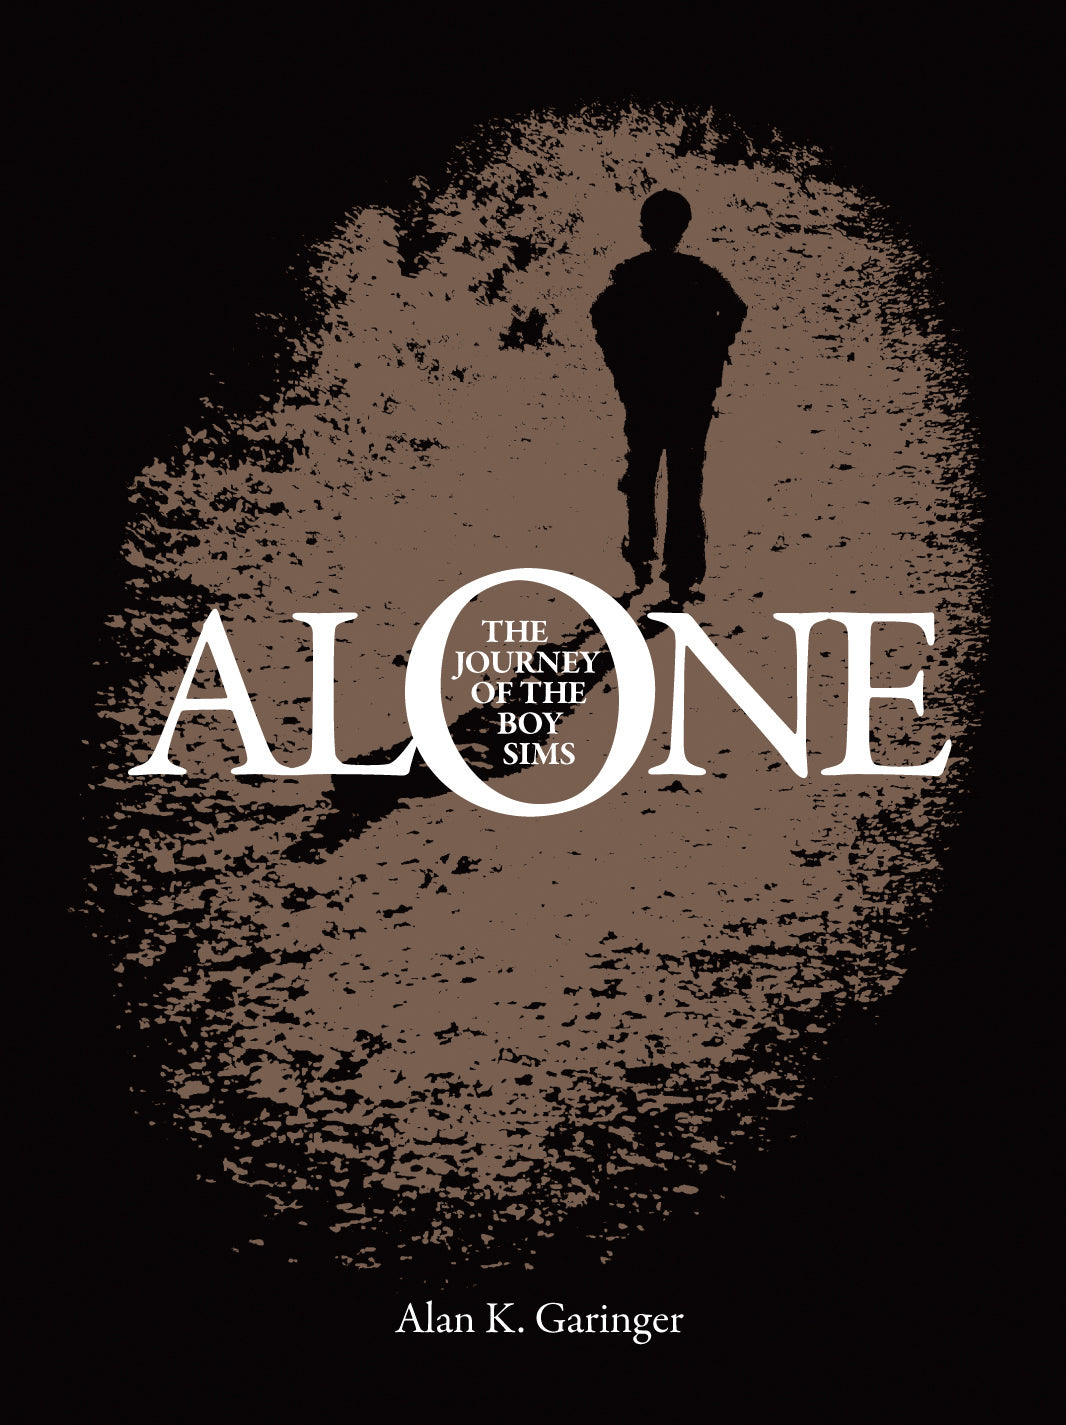 Alone:　Sims　The　–　the　Journey　of　Shop-IHS　Boy　Paperback